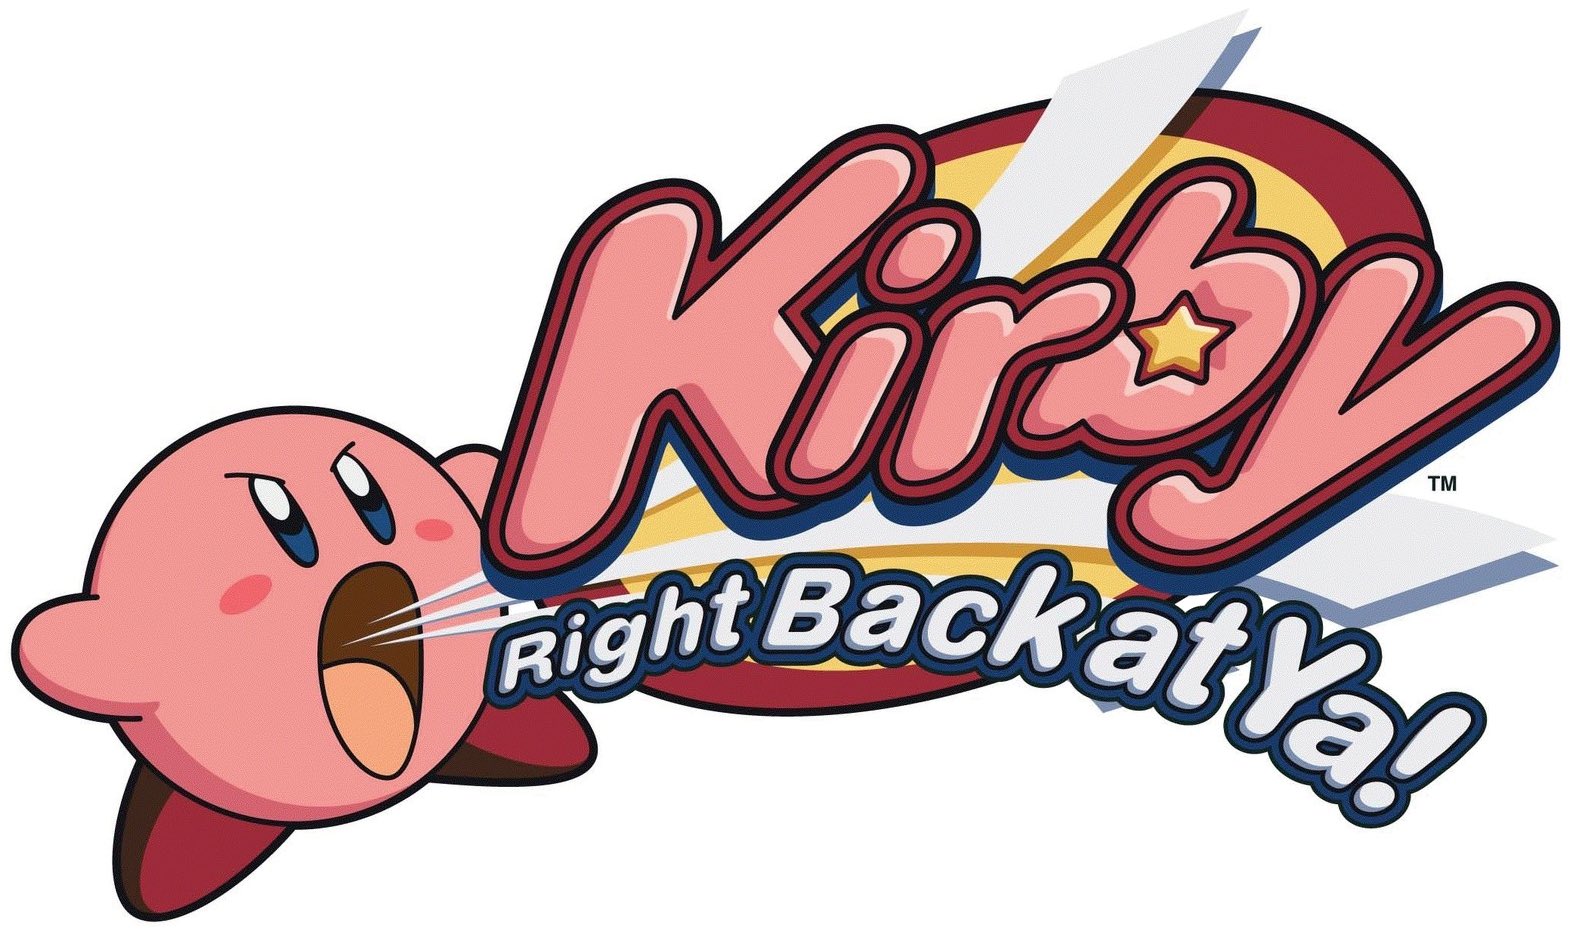 Kirby Facts on Twitter: 